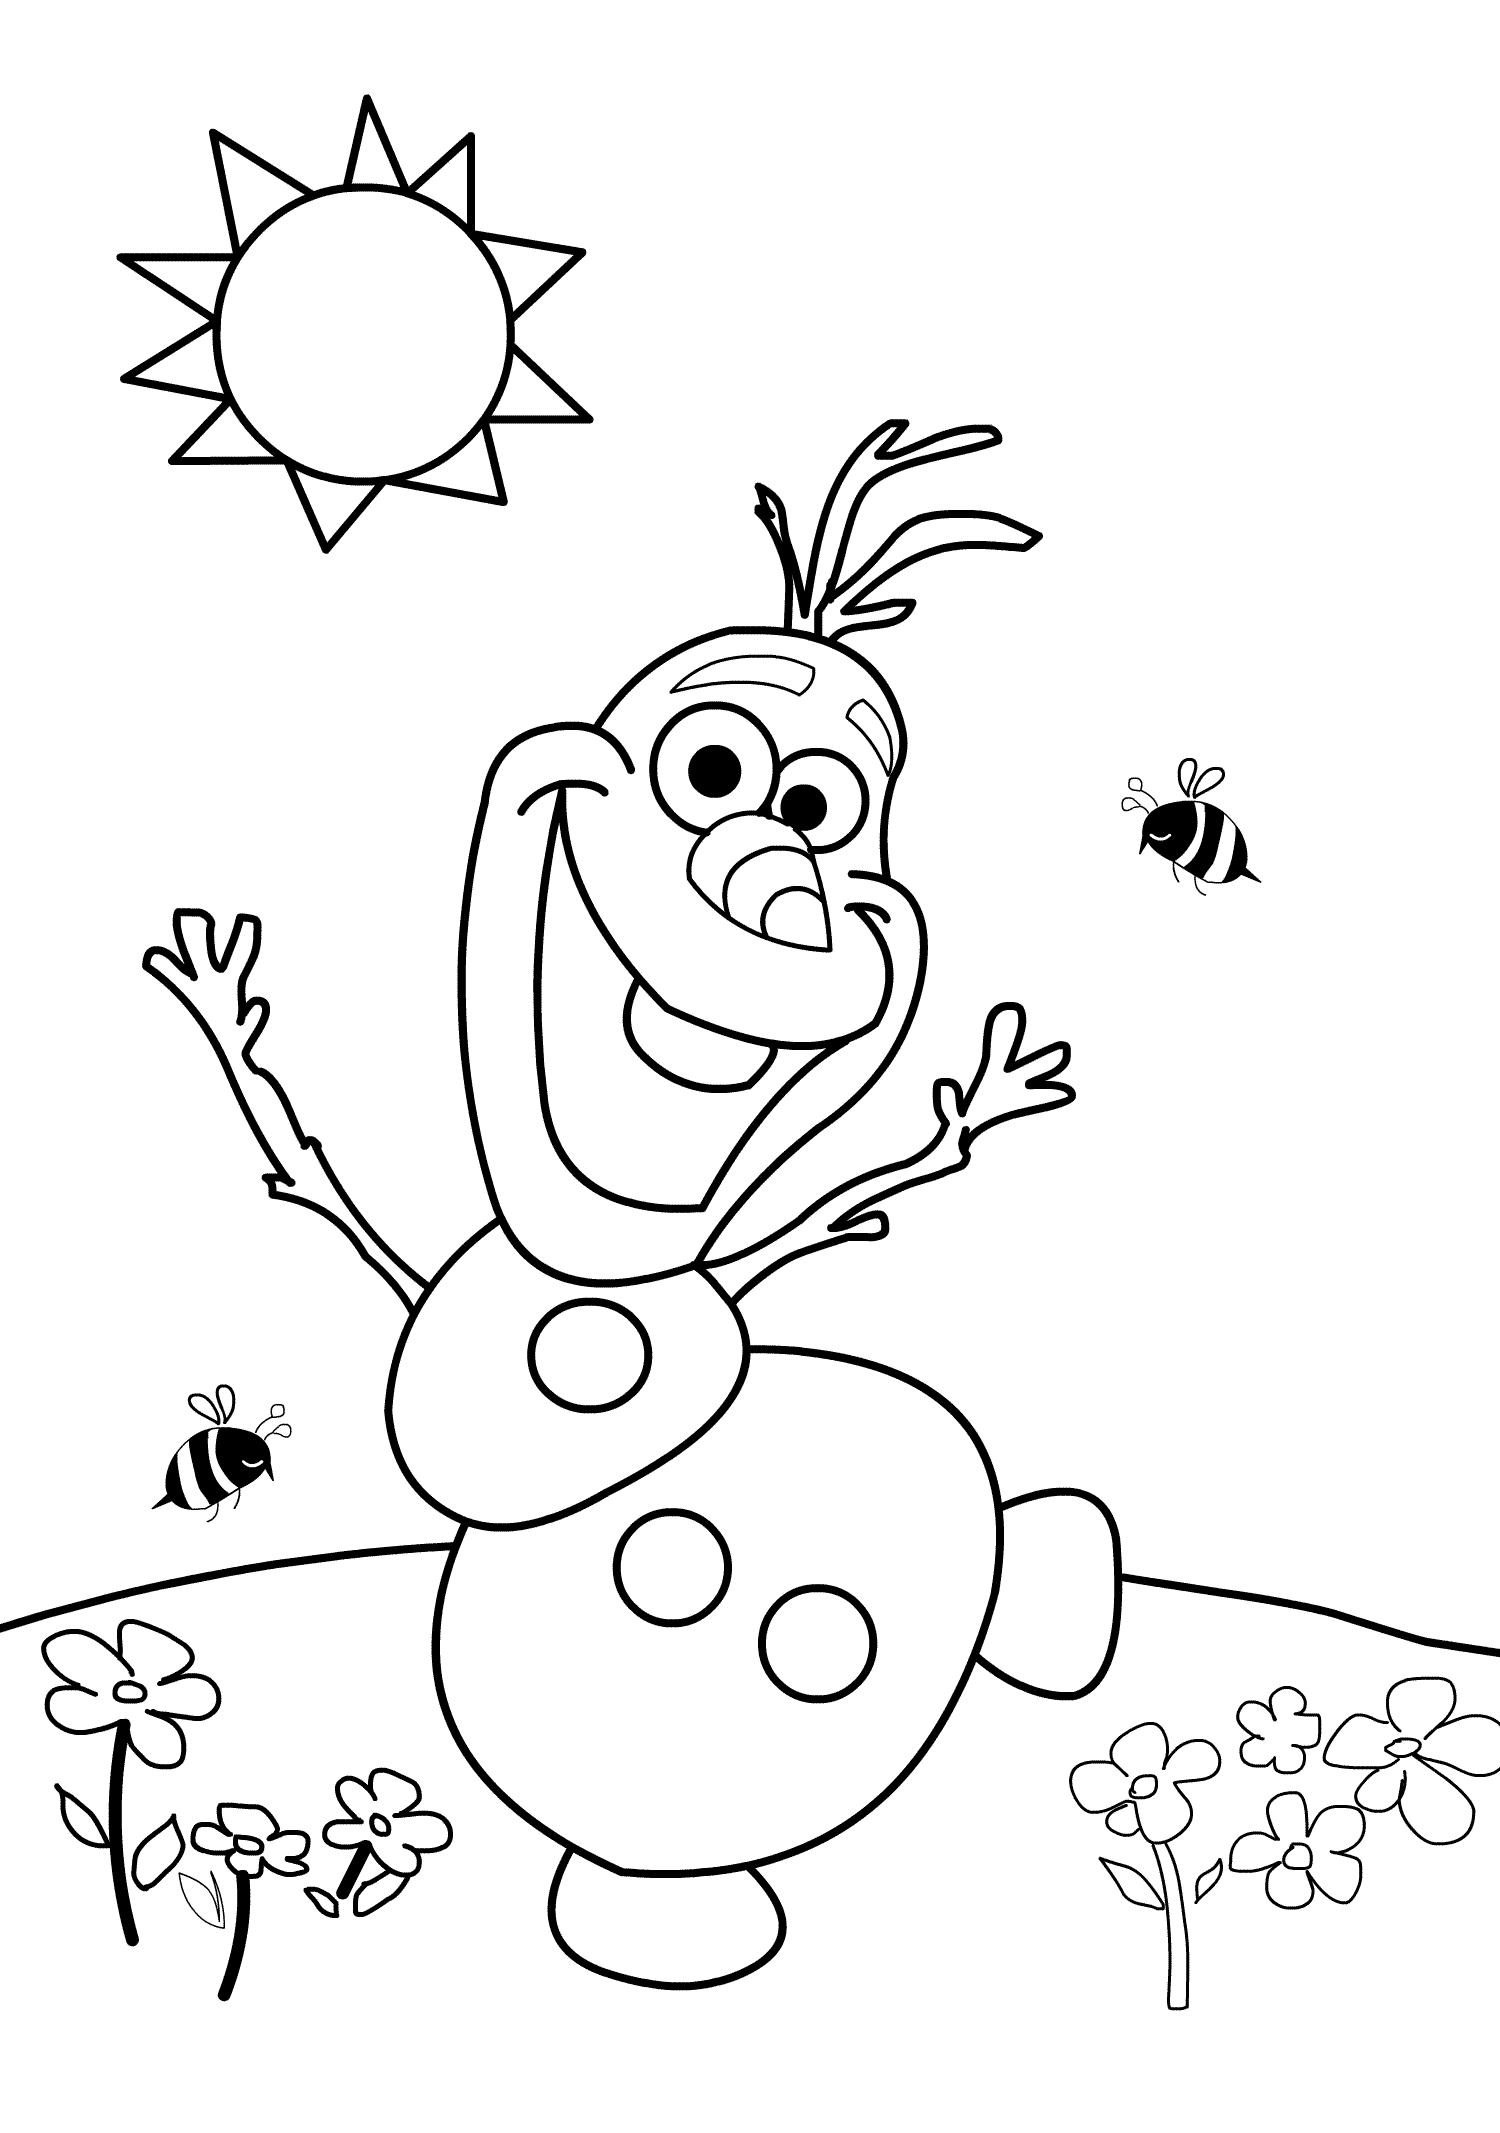 naive-cute-snowman-olaf-printable-frozen-coloring-pages-print-color